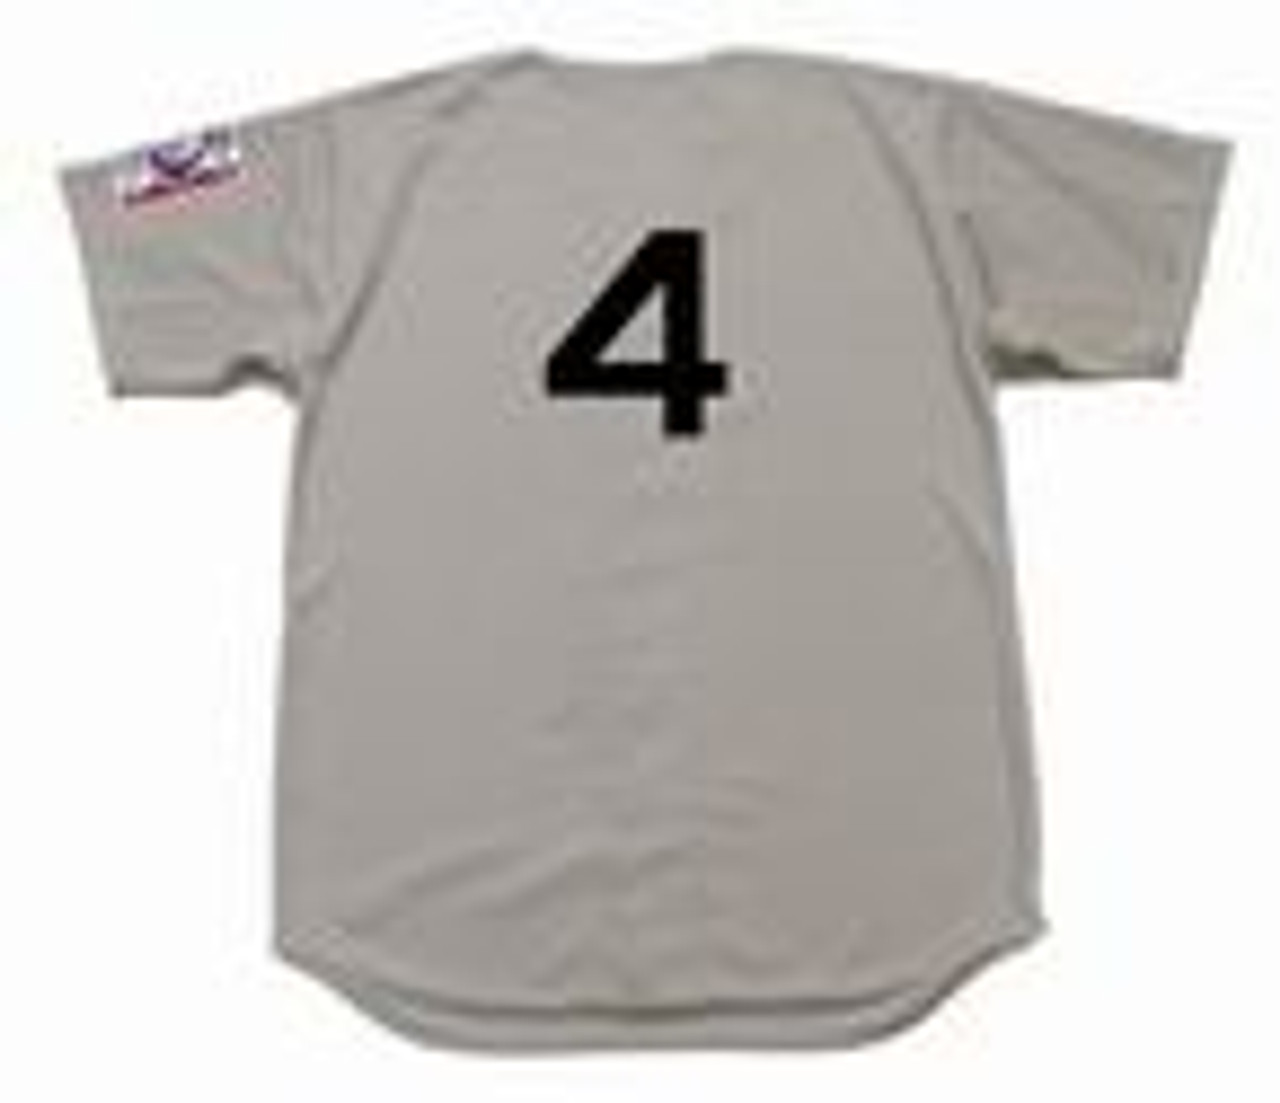 MAJESTIC  LOU GEHRIG New York Yankees 1939 Cooperstown Baseball Jersey